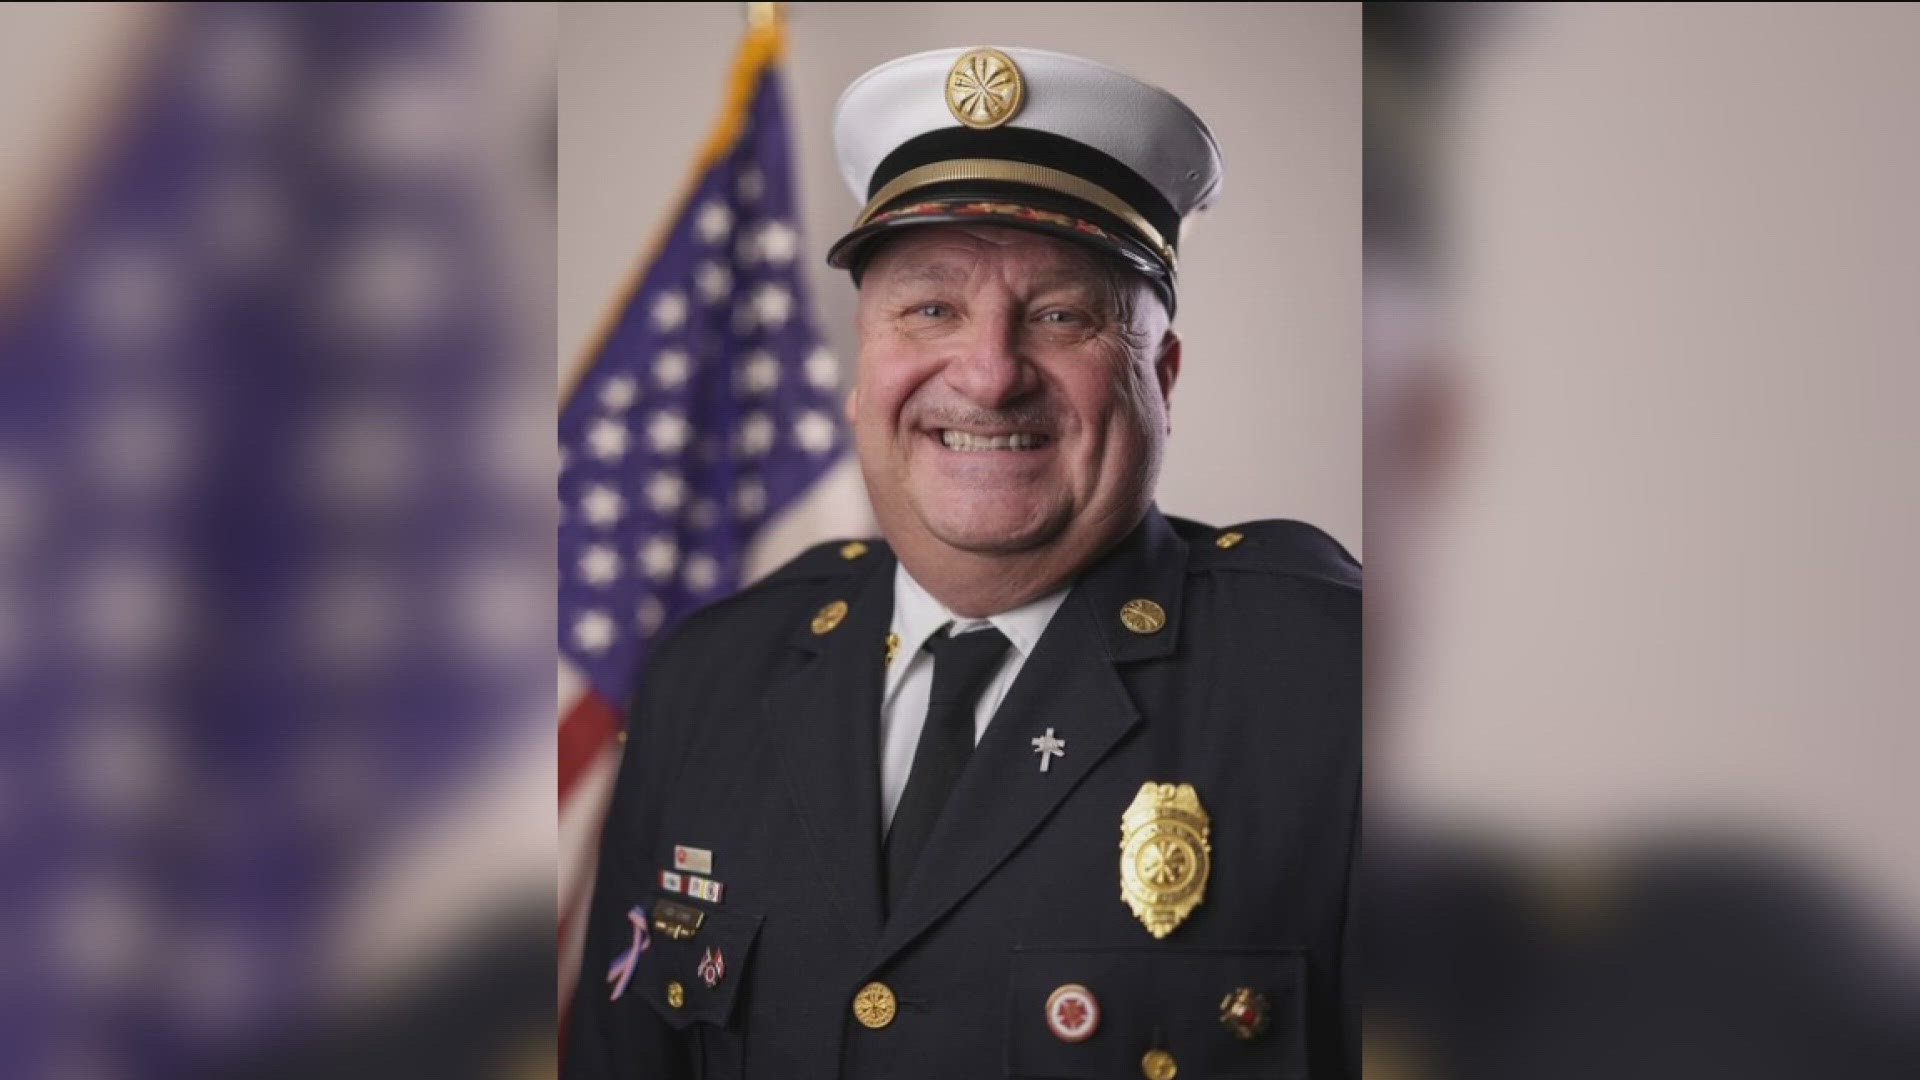 Mike Ramm has served as the township's fire chief for eight years. He was placed on administrative leave on Feb. 12.